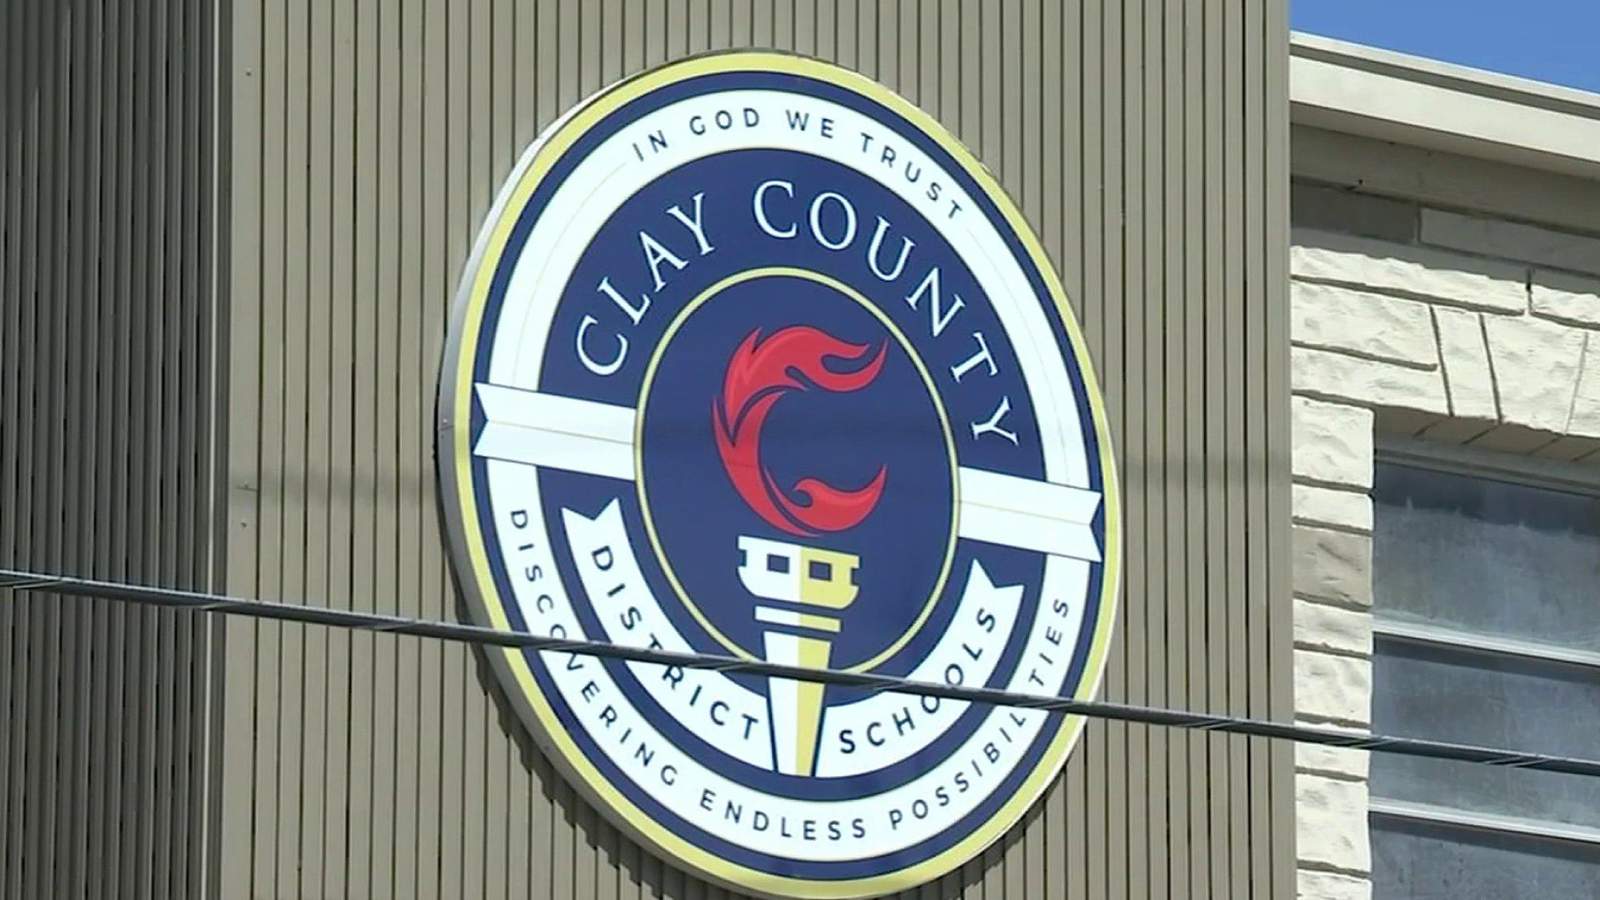 Midnight deadline to enroll Clay County students